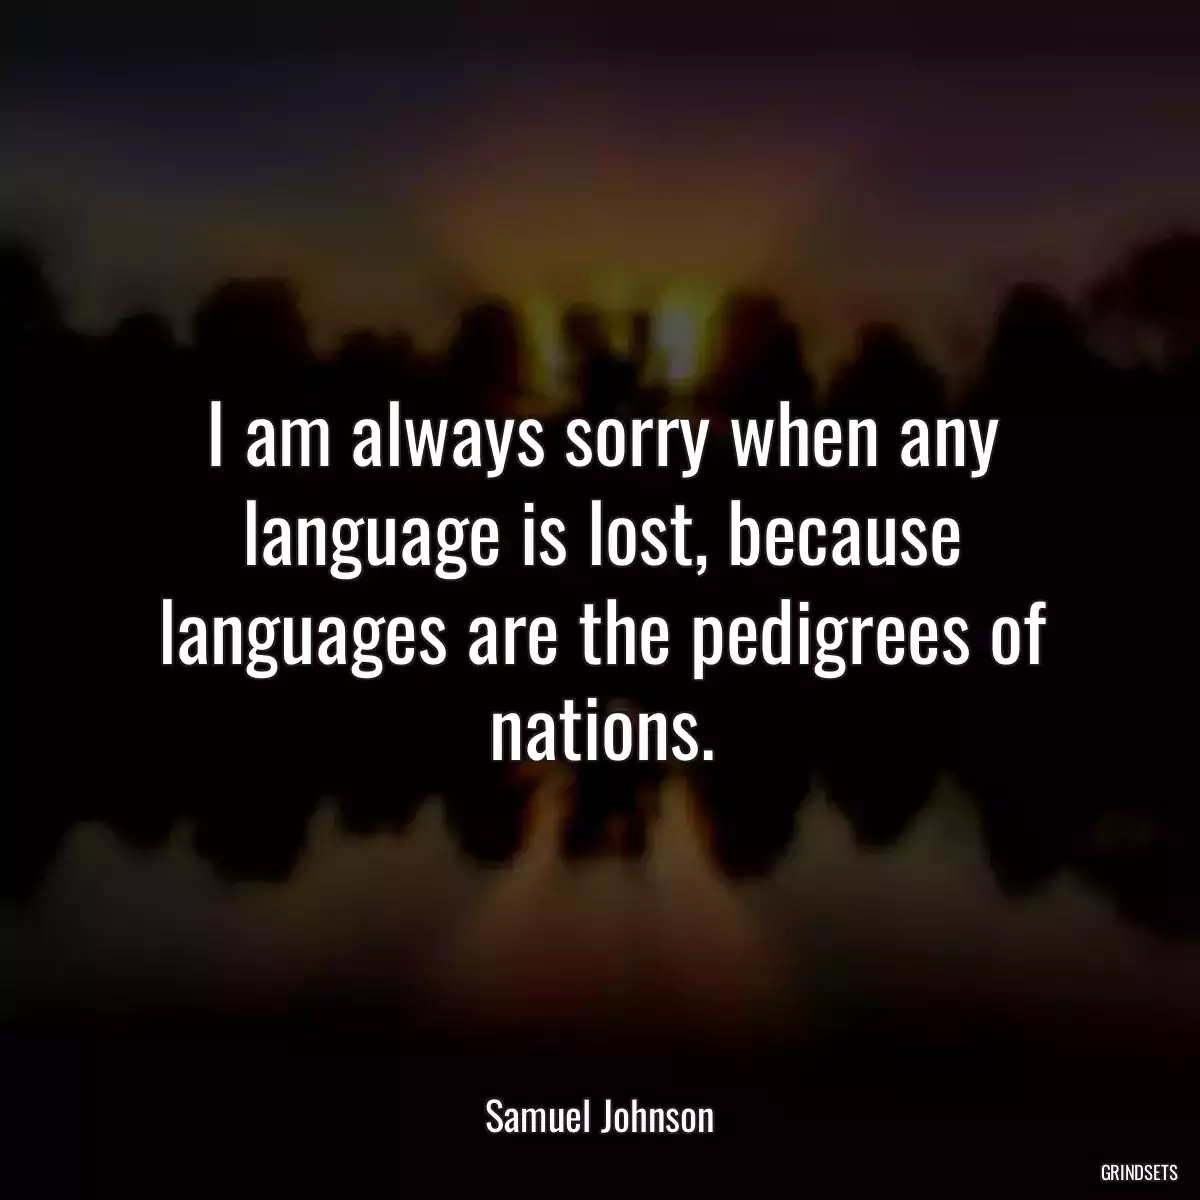 I am always sorry when any language is lost, because languages are the pedigrees of nations.